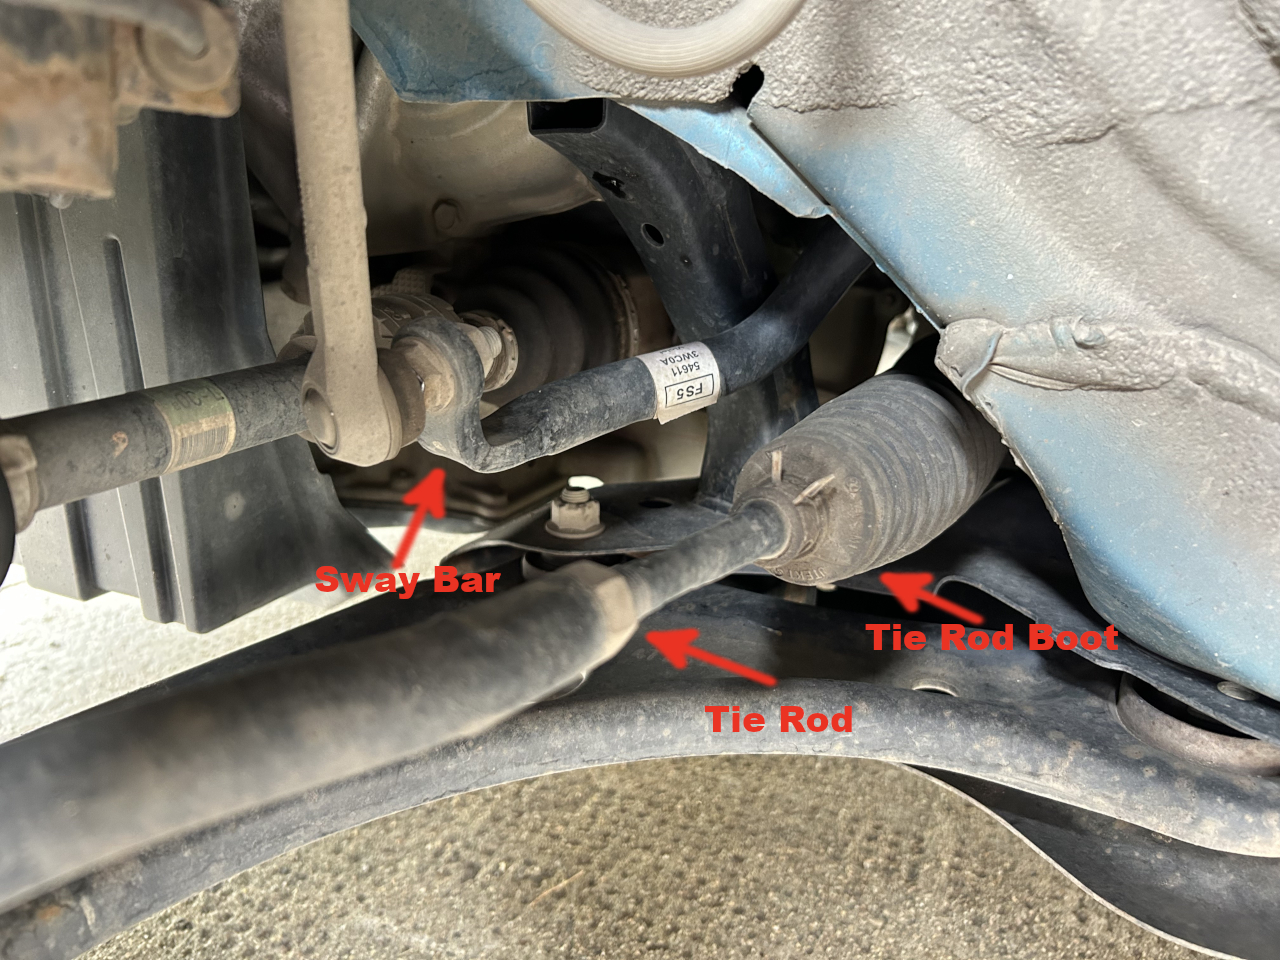 A Picture of a car’s tie rod and boot connecting it to the steering box.